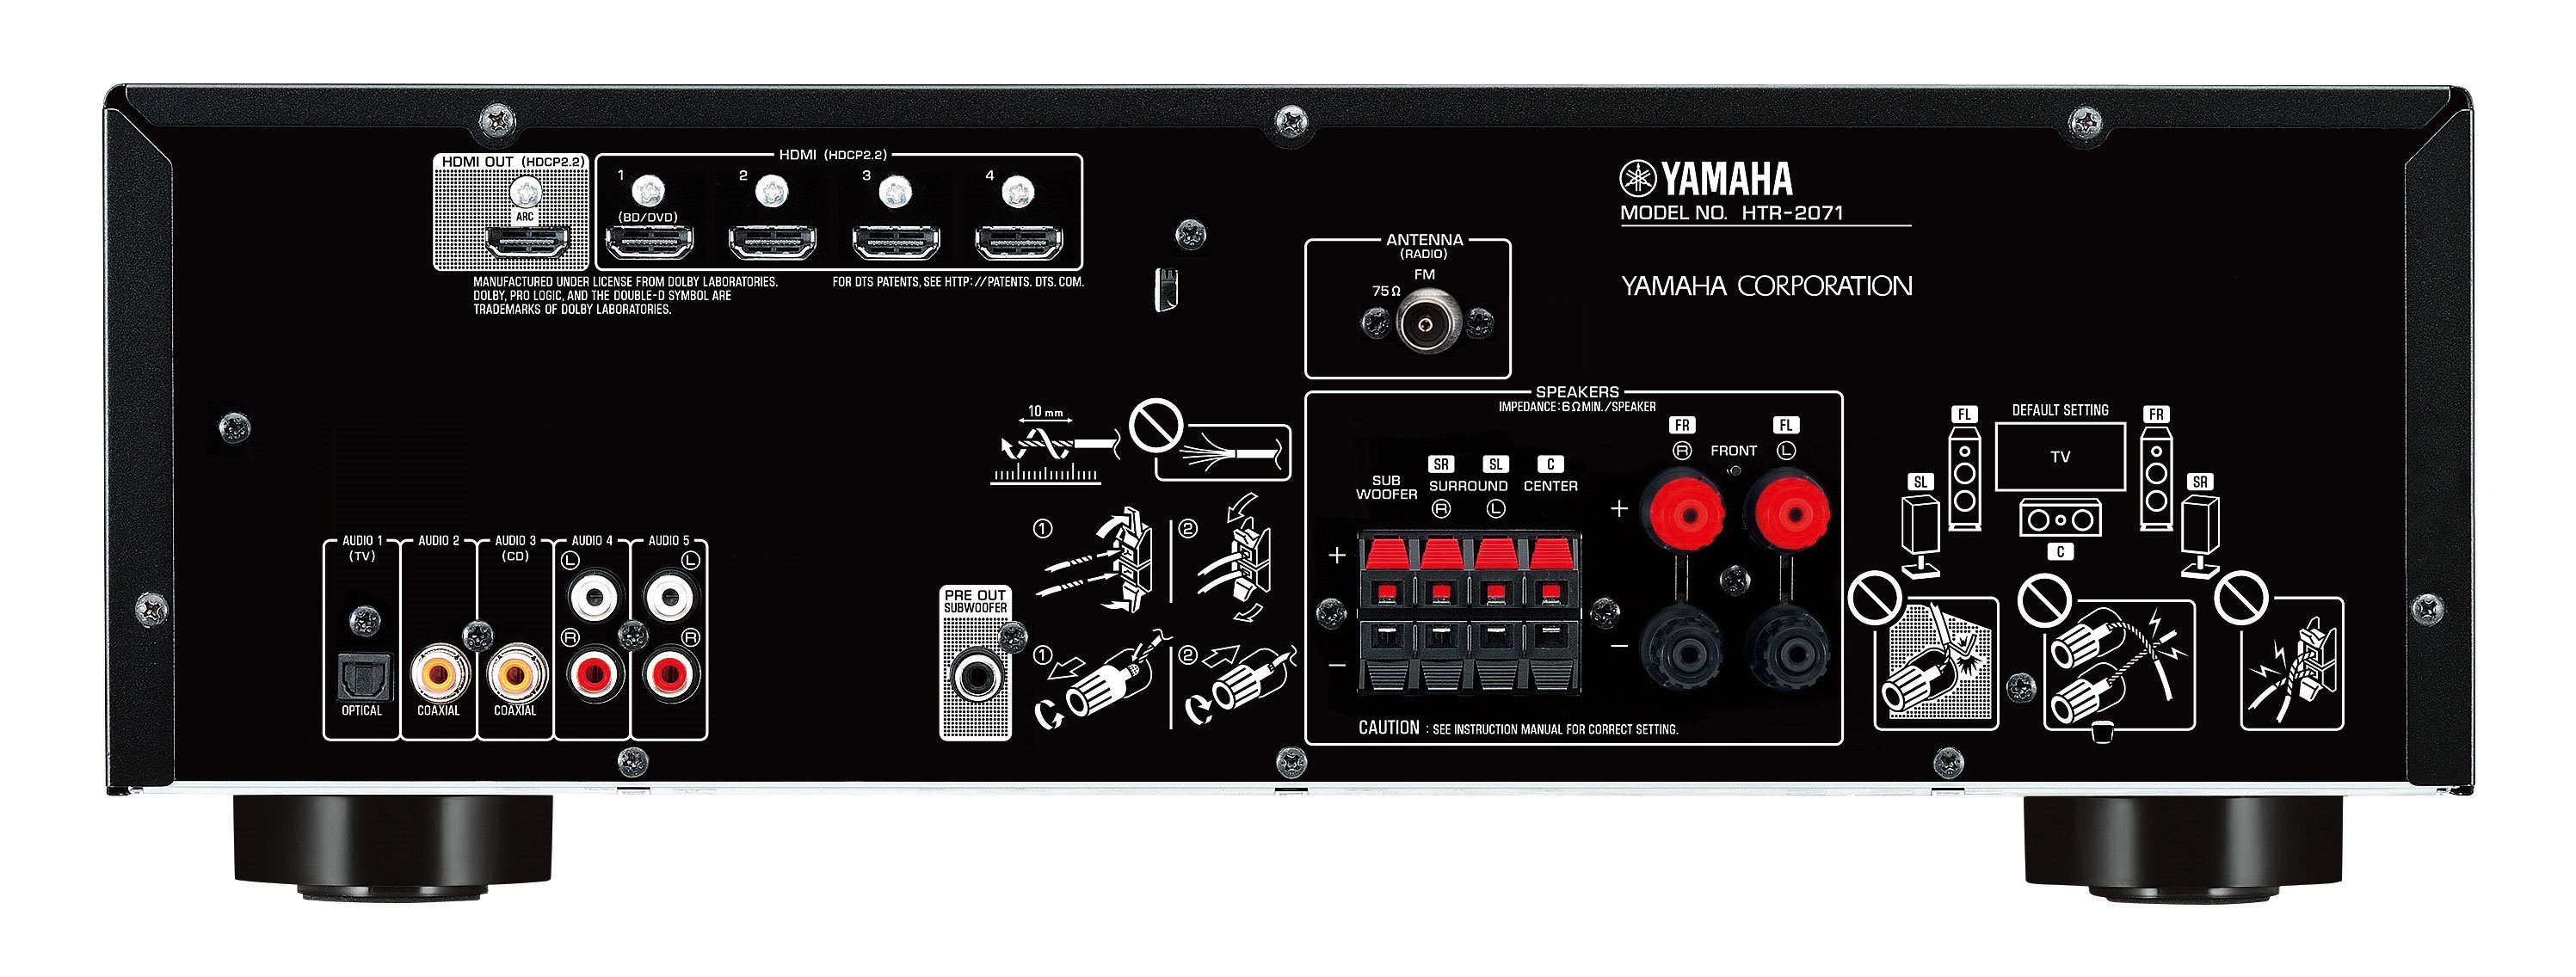 Middle East YHT-1840 Products Africa Asia CIS - Visual / - Overview Home - Systems Audio & / America - / Yamaha Latin / - / - Theater Oceania